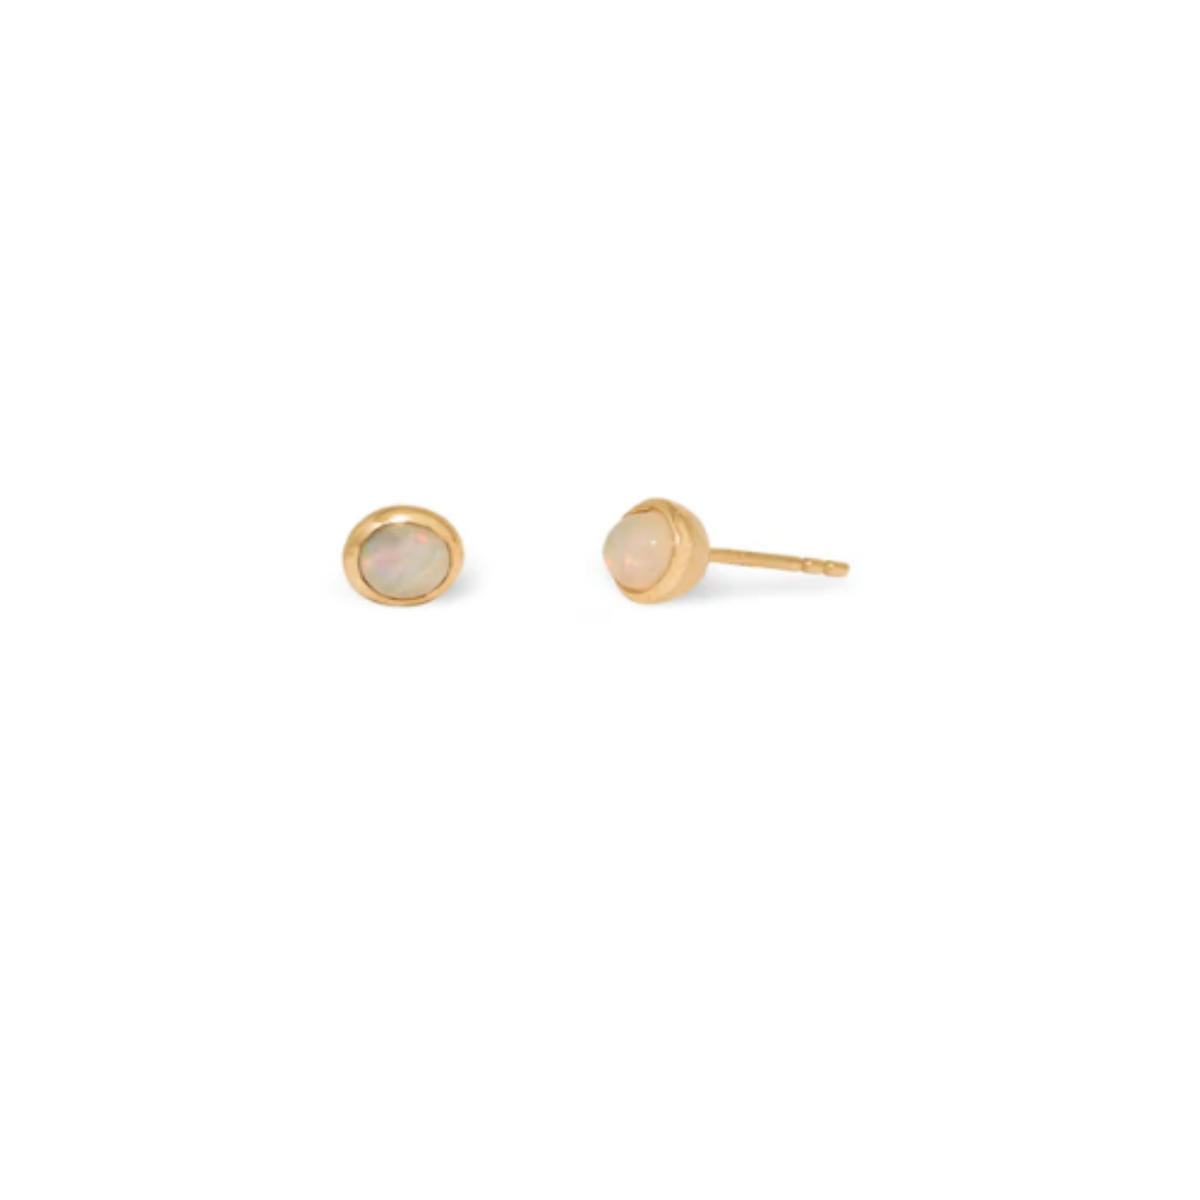 Cabochon Studs, 10K Gold And Opal